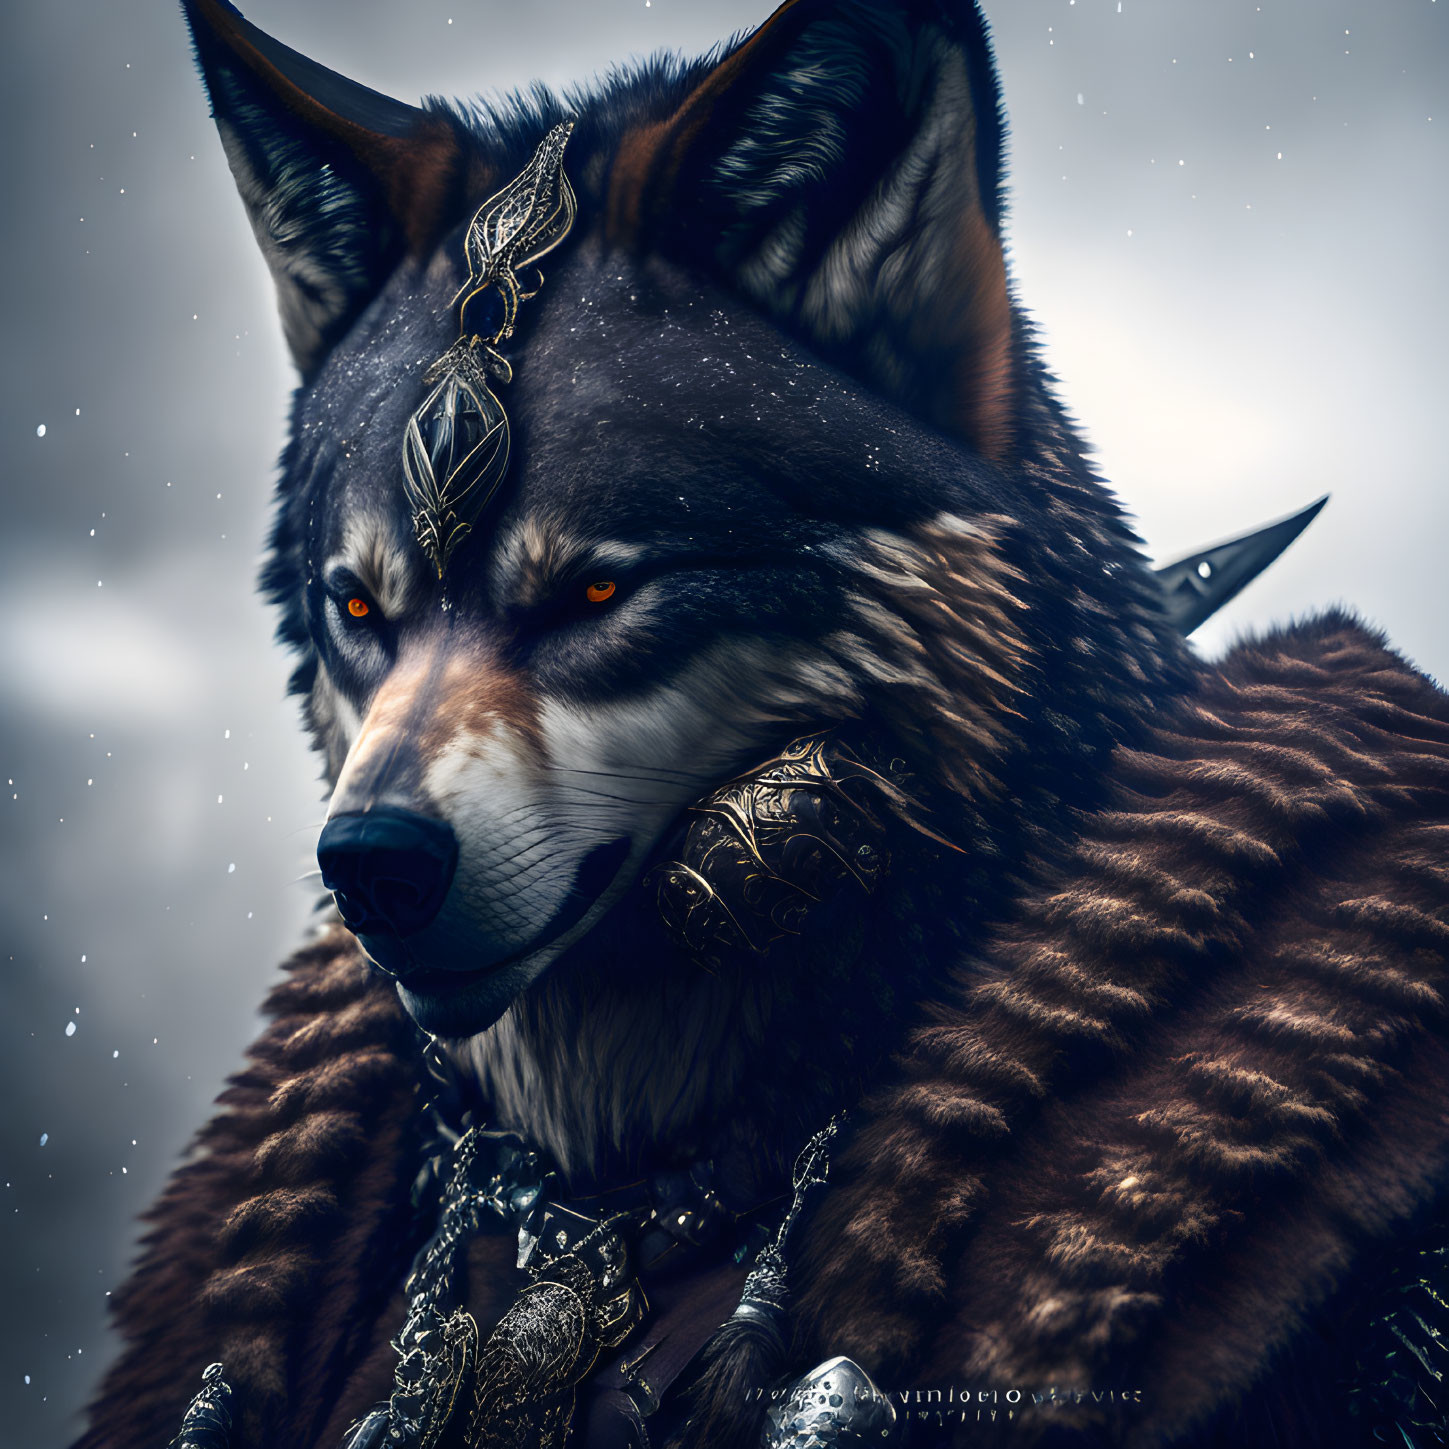 Detailed wolf with red eyes in golden armor against snowy sky.